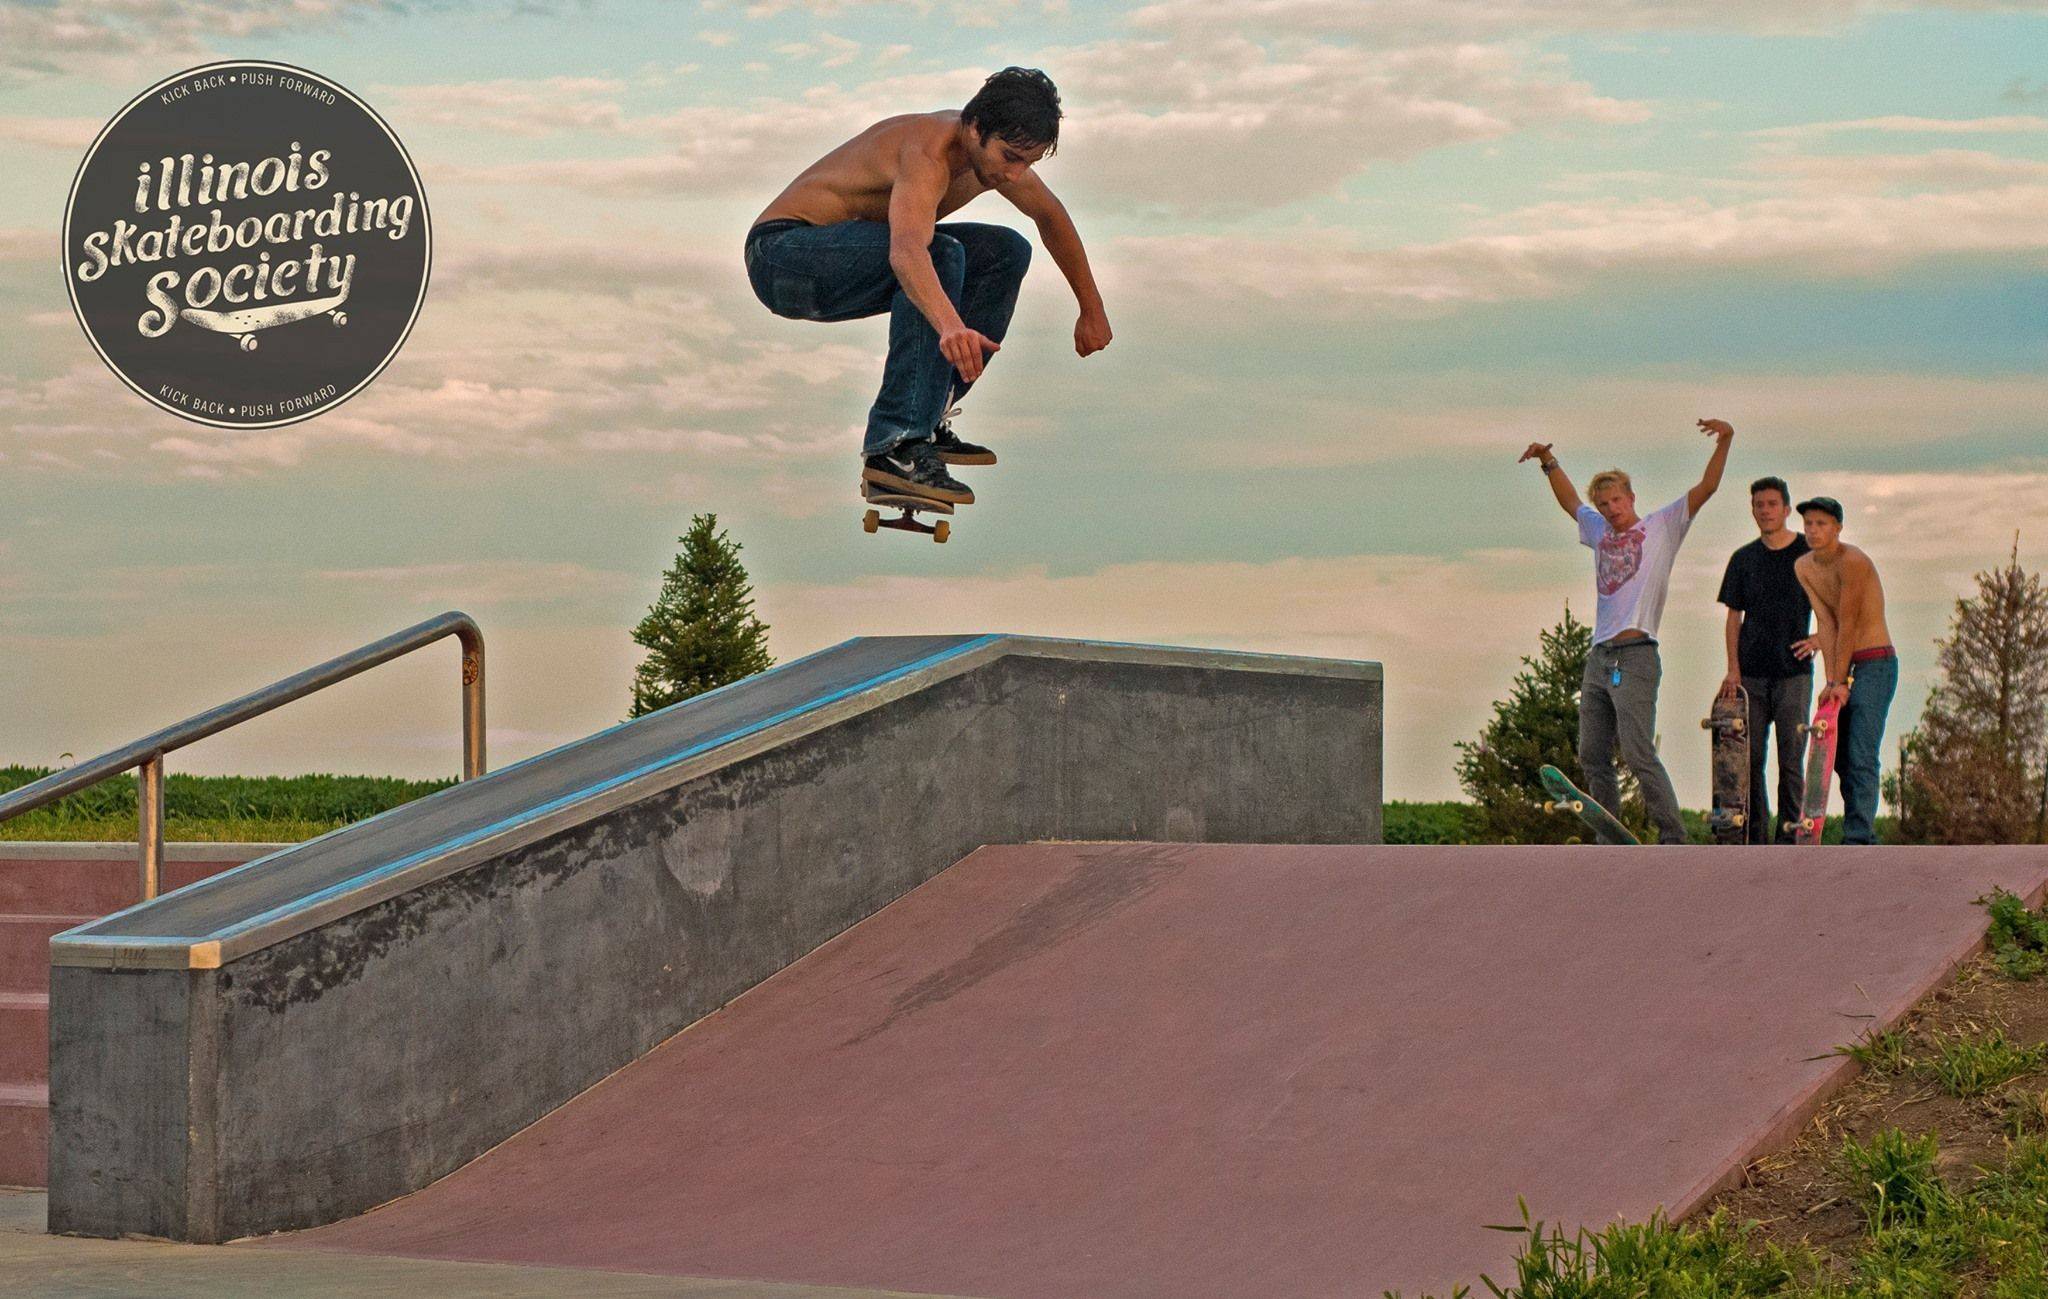 Don’t try this at home: A profile of the Illinois Skateboarding Society